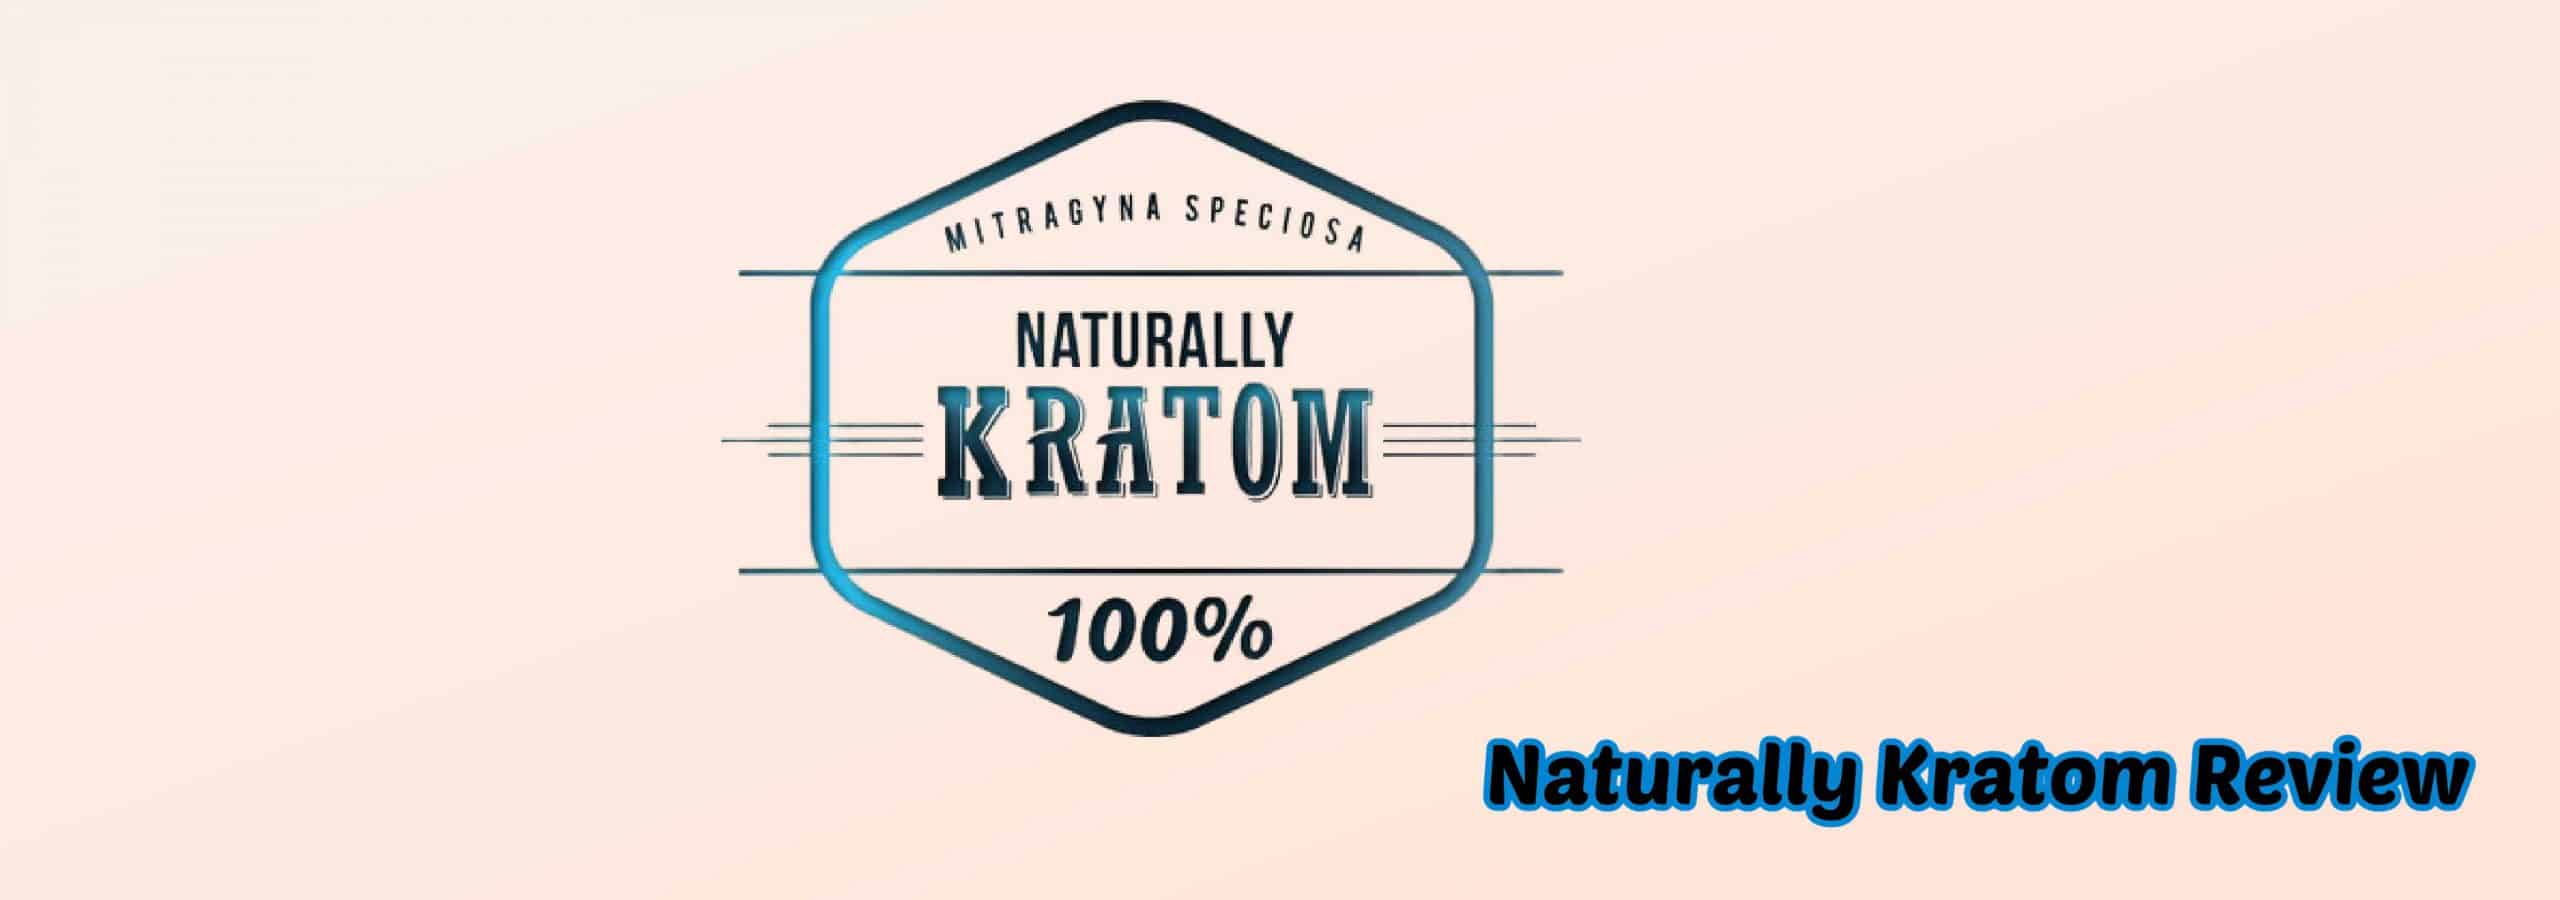 image of naturally kratom review